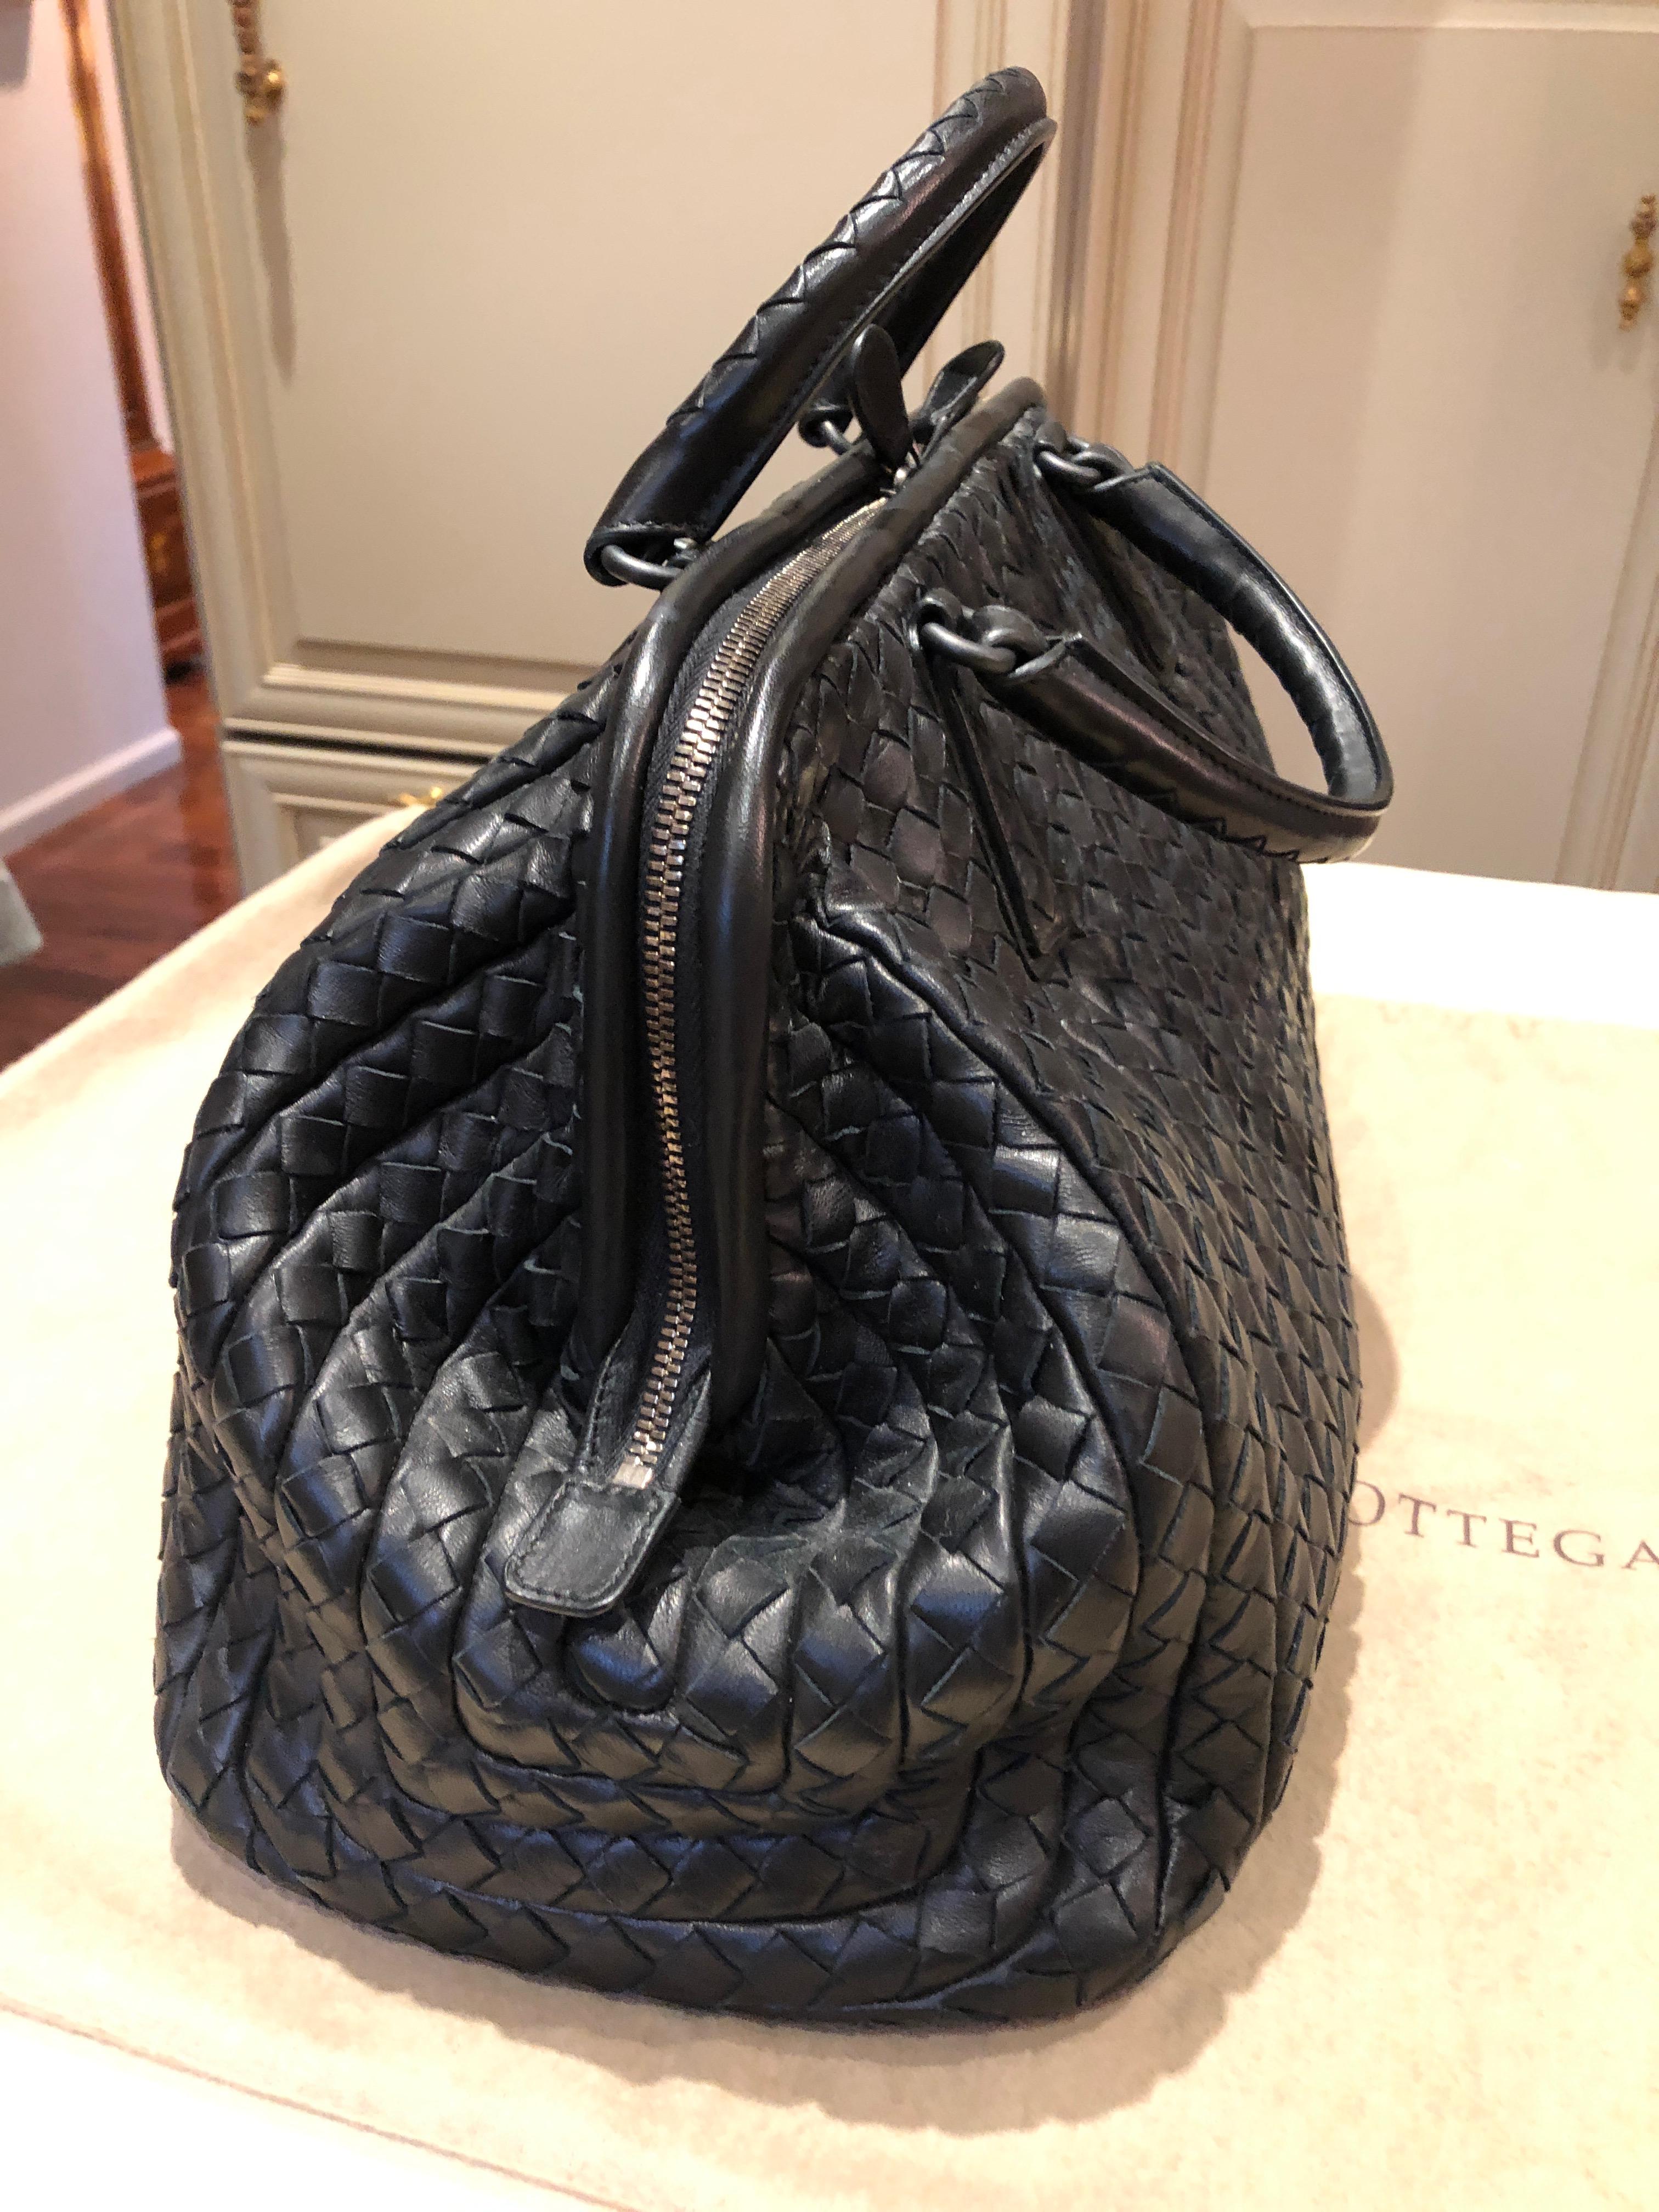 Exceptional black Bottega Veneta new bond satchel crafted of calfskin leather in the Intrecciato signature pattern. The bag features two rolled handles, top zipper closure, and a suede lined interior with small pocket and zippered compartment. Comes